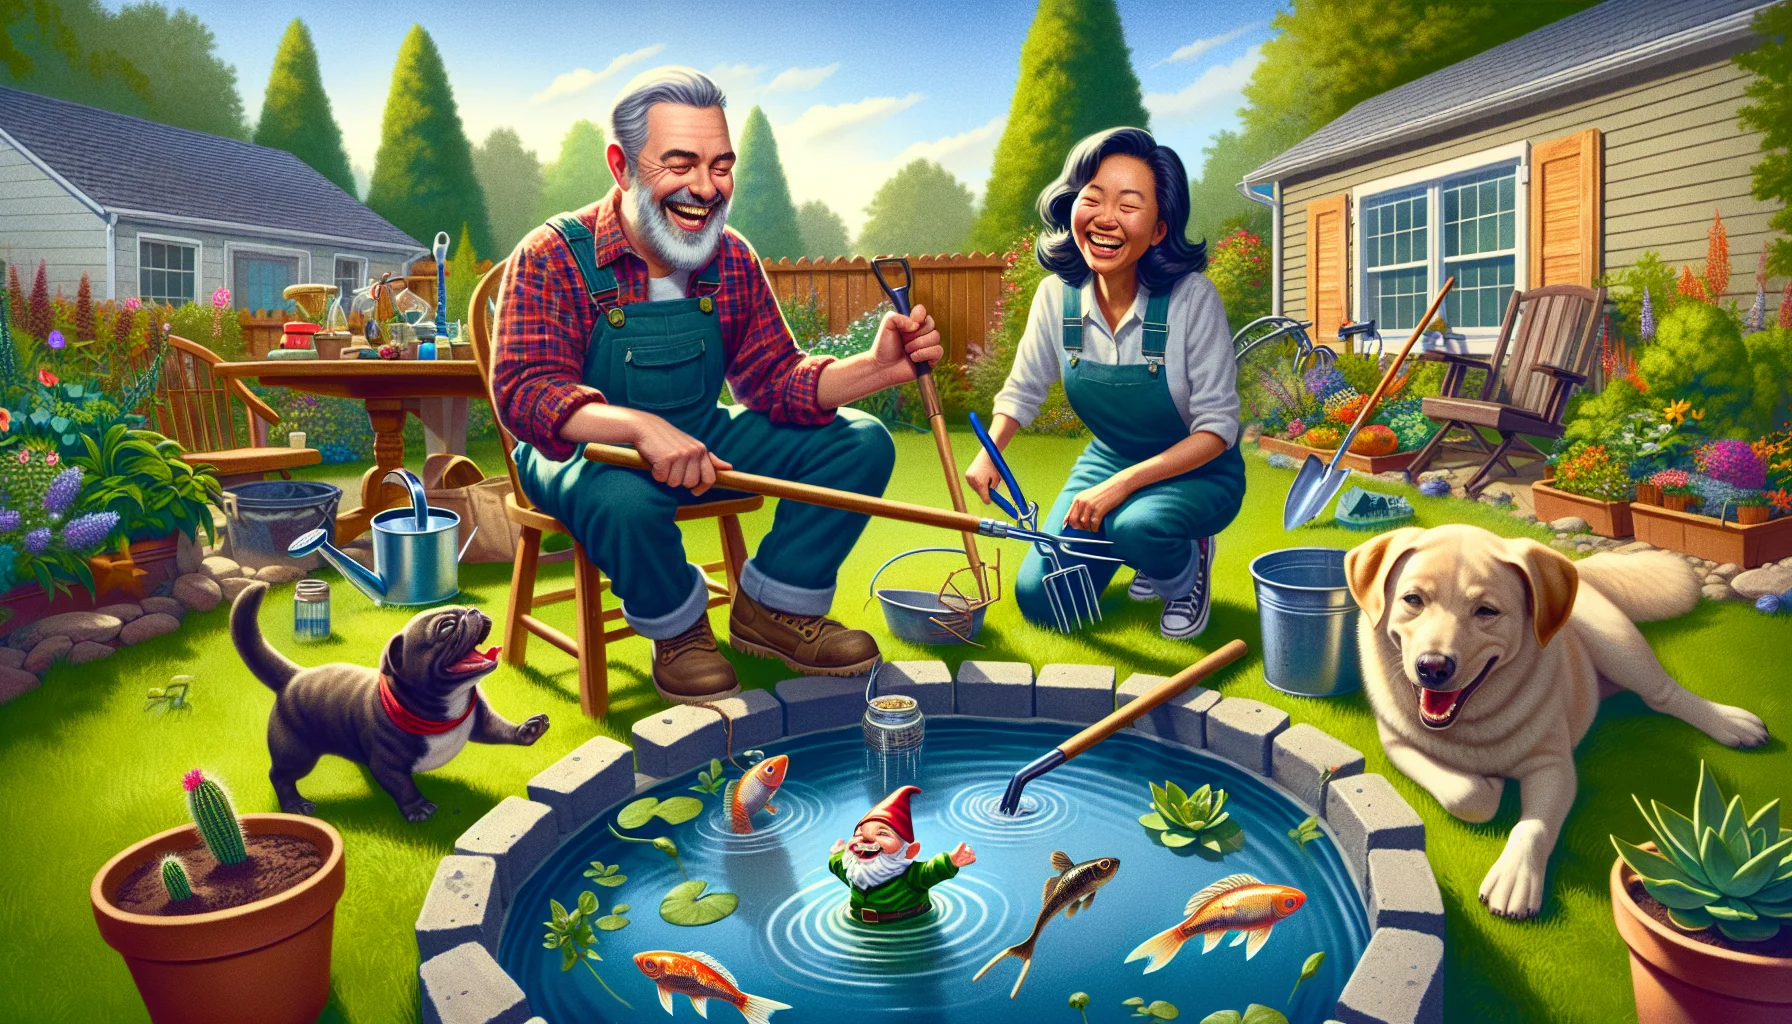 Depict an amusing and lighthearted gardening scene, which introduces the concept of garden ponds to the viewers. The scene should be set in a suburban backyard. In the foreground, a man of Caucasian descent and a woman of South Asian descent are taking part in pond creation with big smiles on their faces. They are wearing gardening attire and surrounded by a variety of garden tools. Additionally, to add humor to the scene, envision a garden gnome trying to 'help' by fishing in the unfinished pond, and a dog chasing a startled frog jumping out of the pond. The depiction should vividly demonstrate the fun and joy of gardening and pond creation, enticing viewers to get involved in gardening activities.